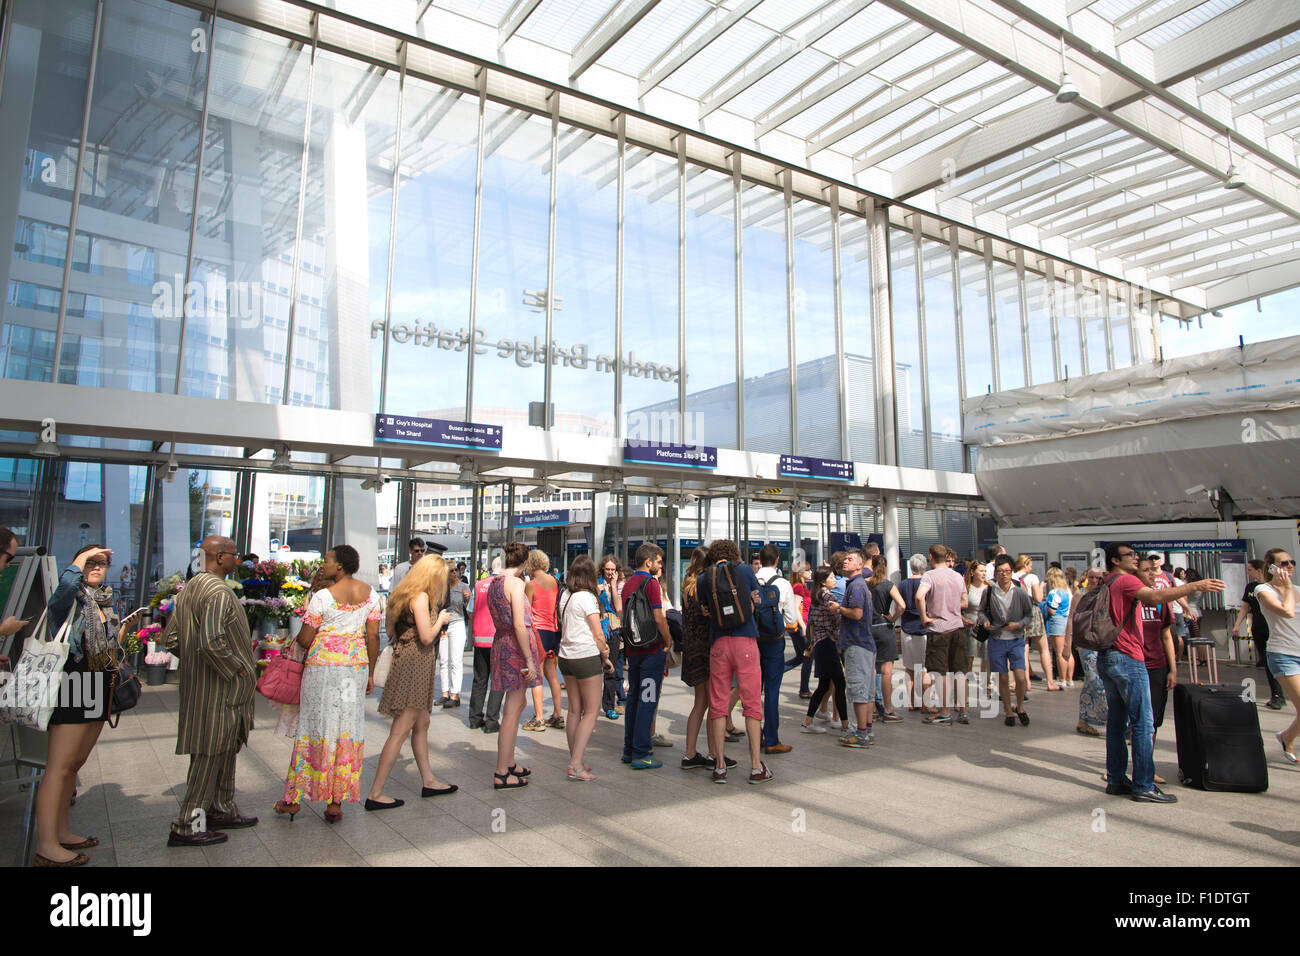 Queues of summer commuters lining up to purchase rail tickets at London Bridge train station, Central London, England, UK Stock Photo